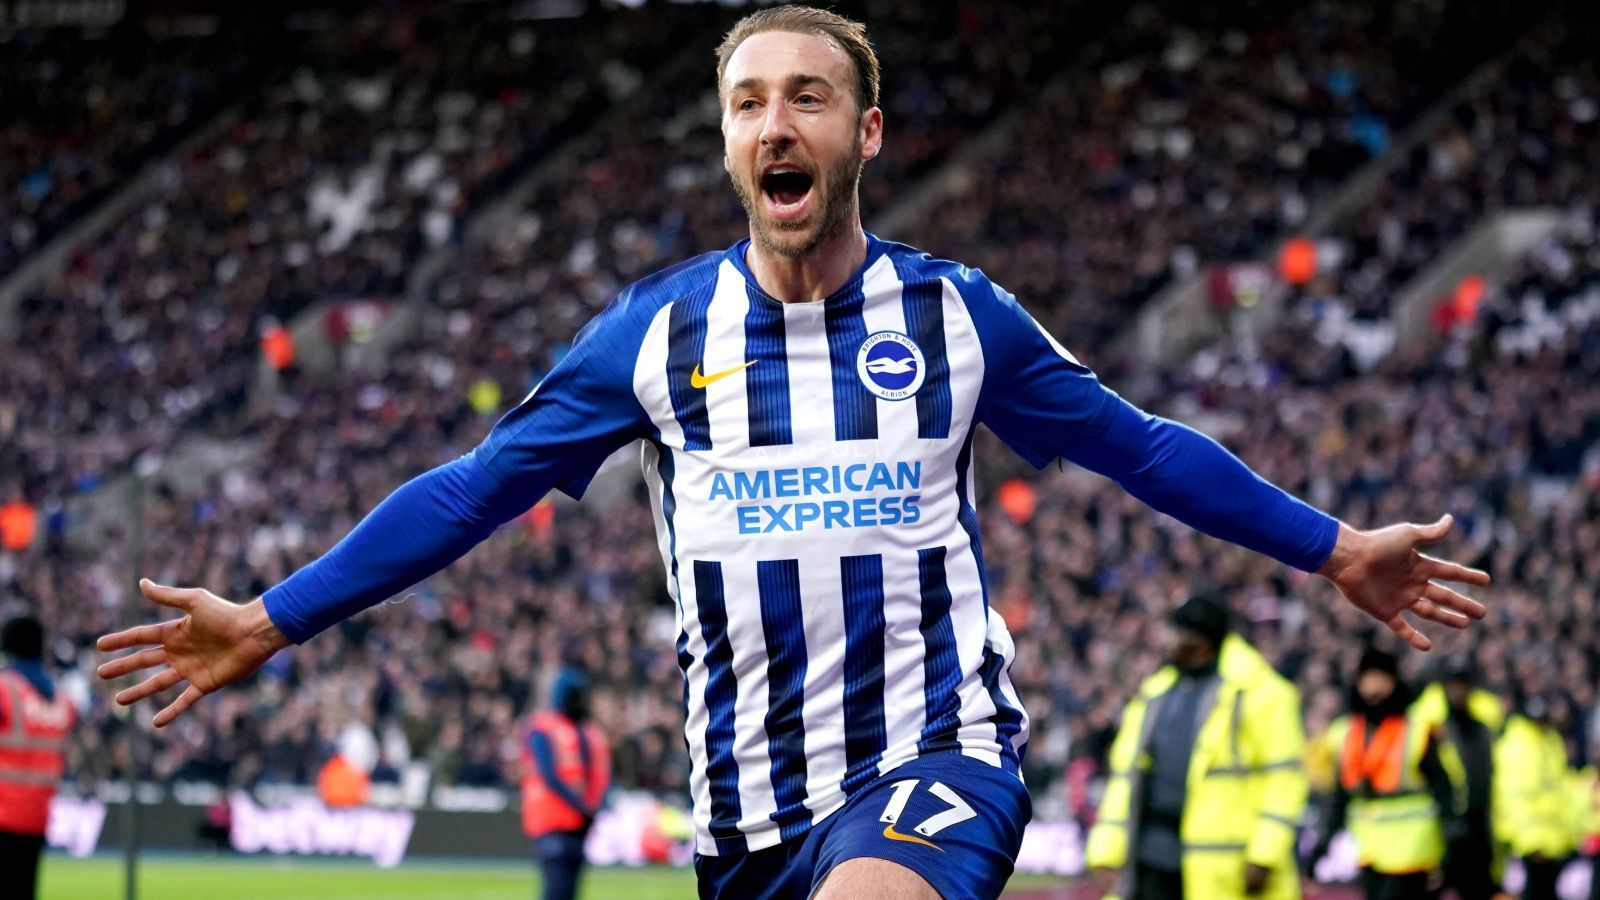 
                <strong>Brighton & Hove Albion</strong><br>
                &#x2022; 1. Glenn Murray (26 Tore, im Bild) -<br>&#x2022; 2. Neal Maupay (20) -<br>&#x2022; 3. Pascal Groß (15)<br>
              